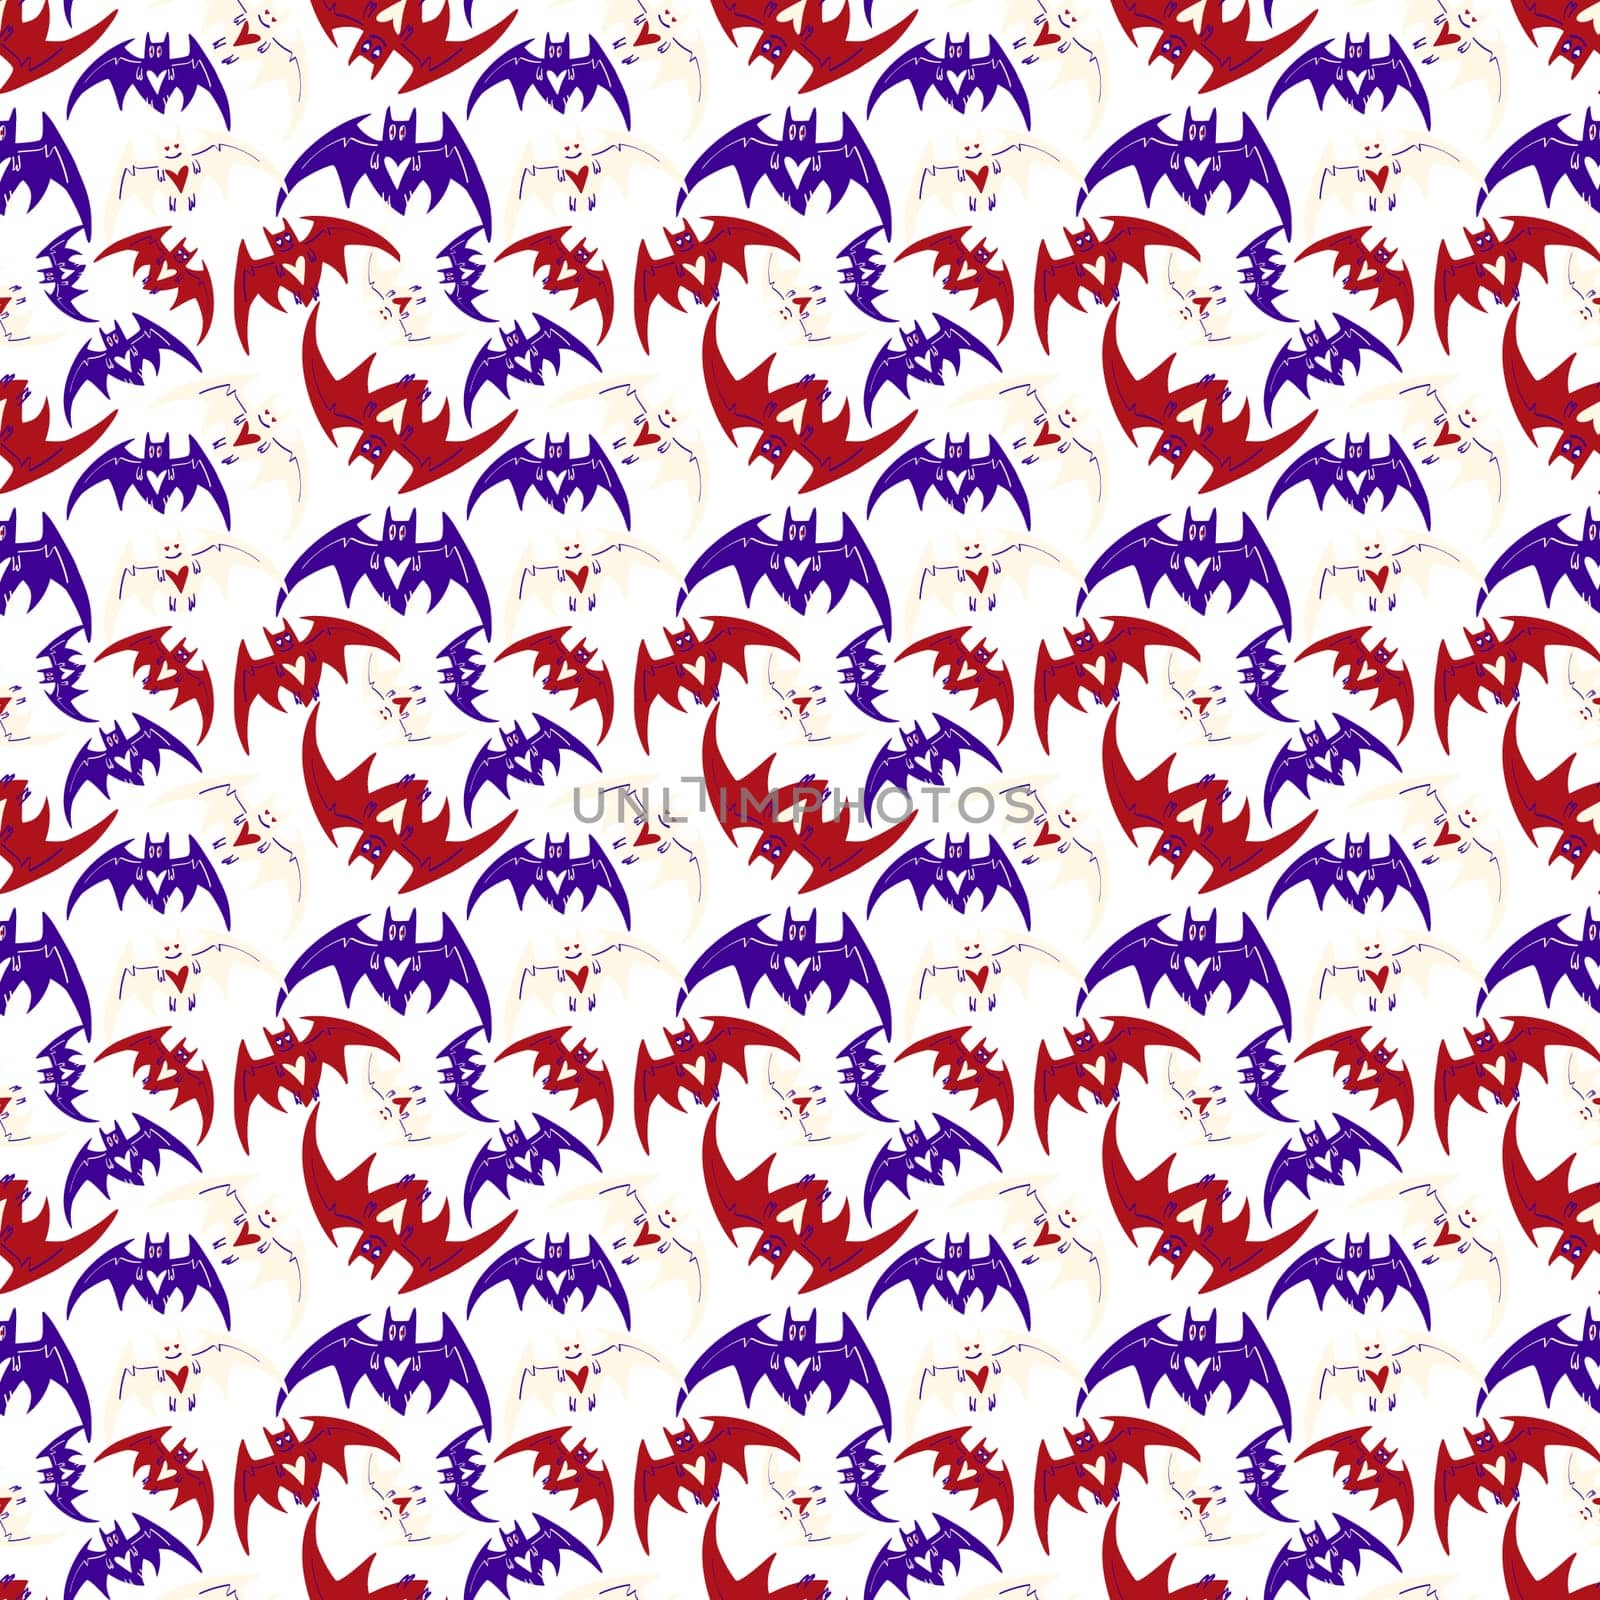 Purple funny magic pattern with bats. mystical pattern with Halloween bats in a trendy cartoon style by Dustick